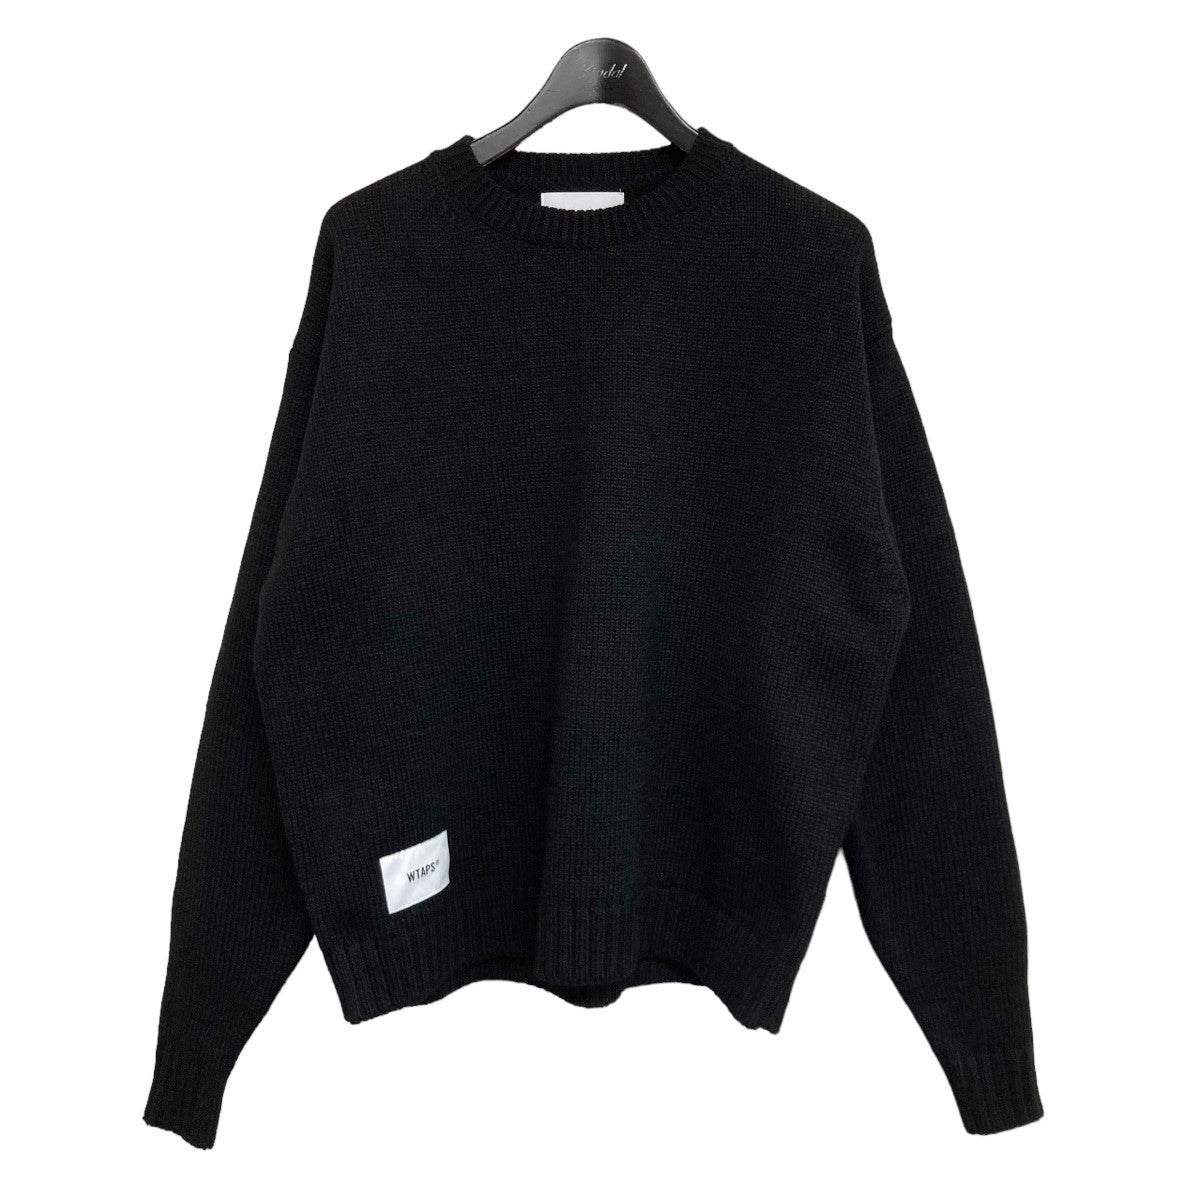 WTAPS(ダブルタップス) 2023AW 「CREW NECK 02 SWEATER POLY． SIGN」